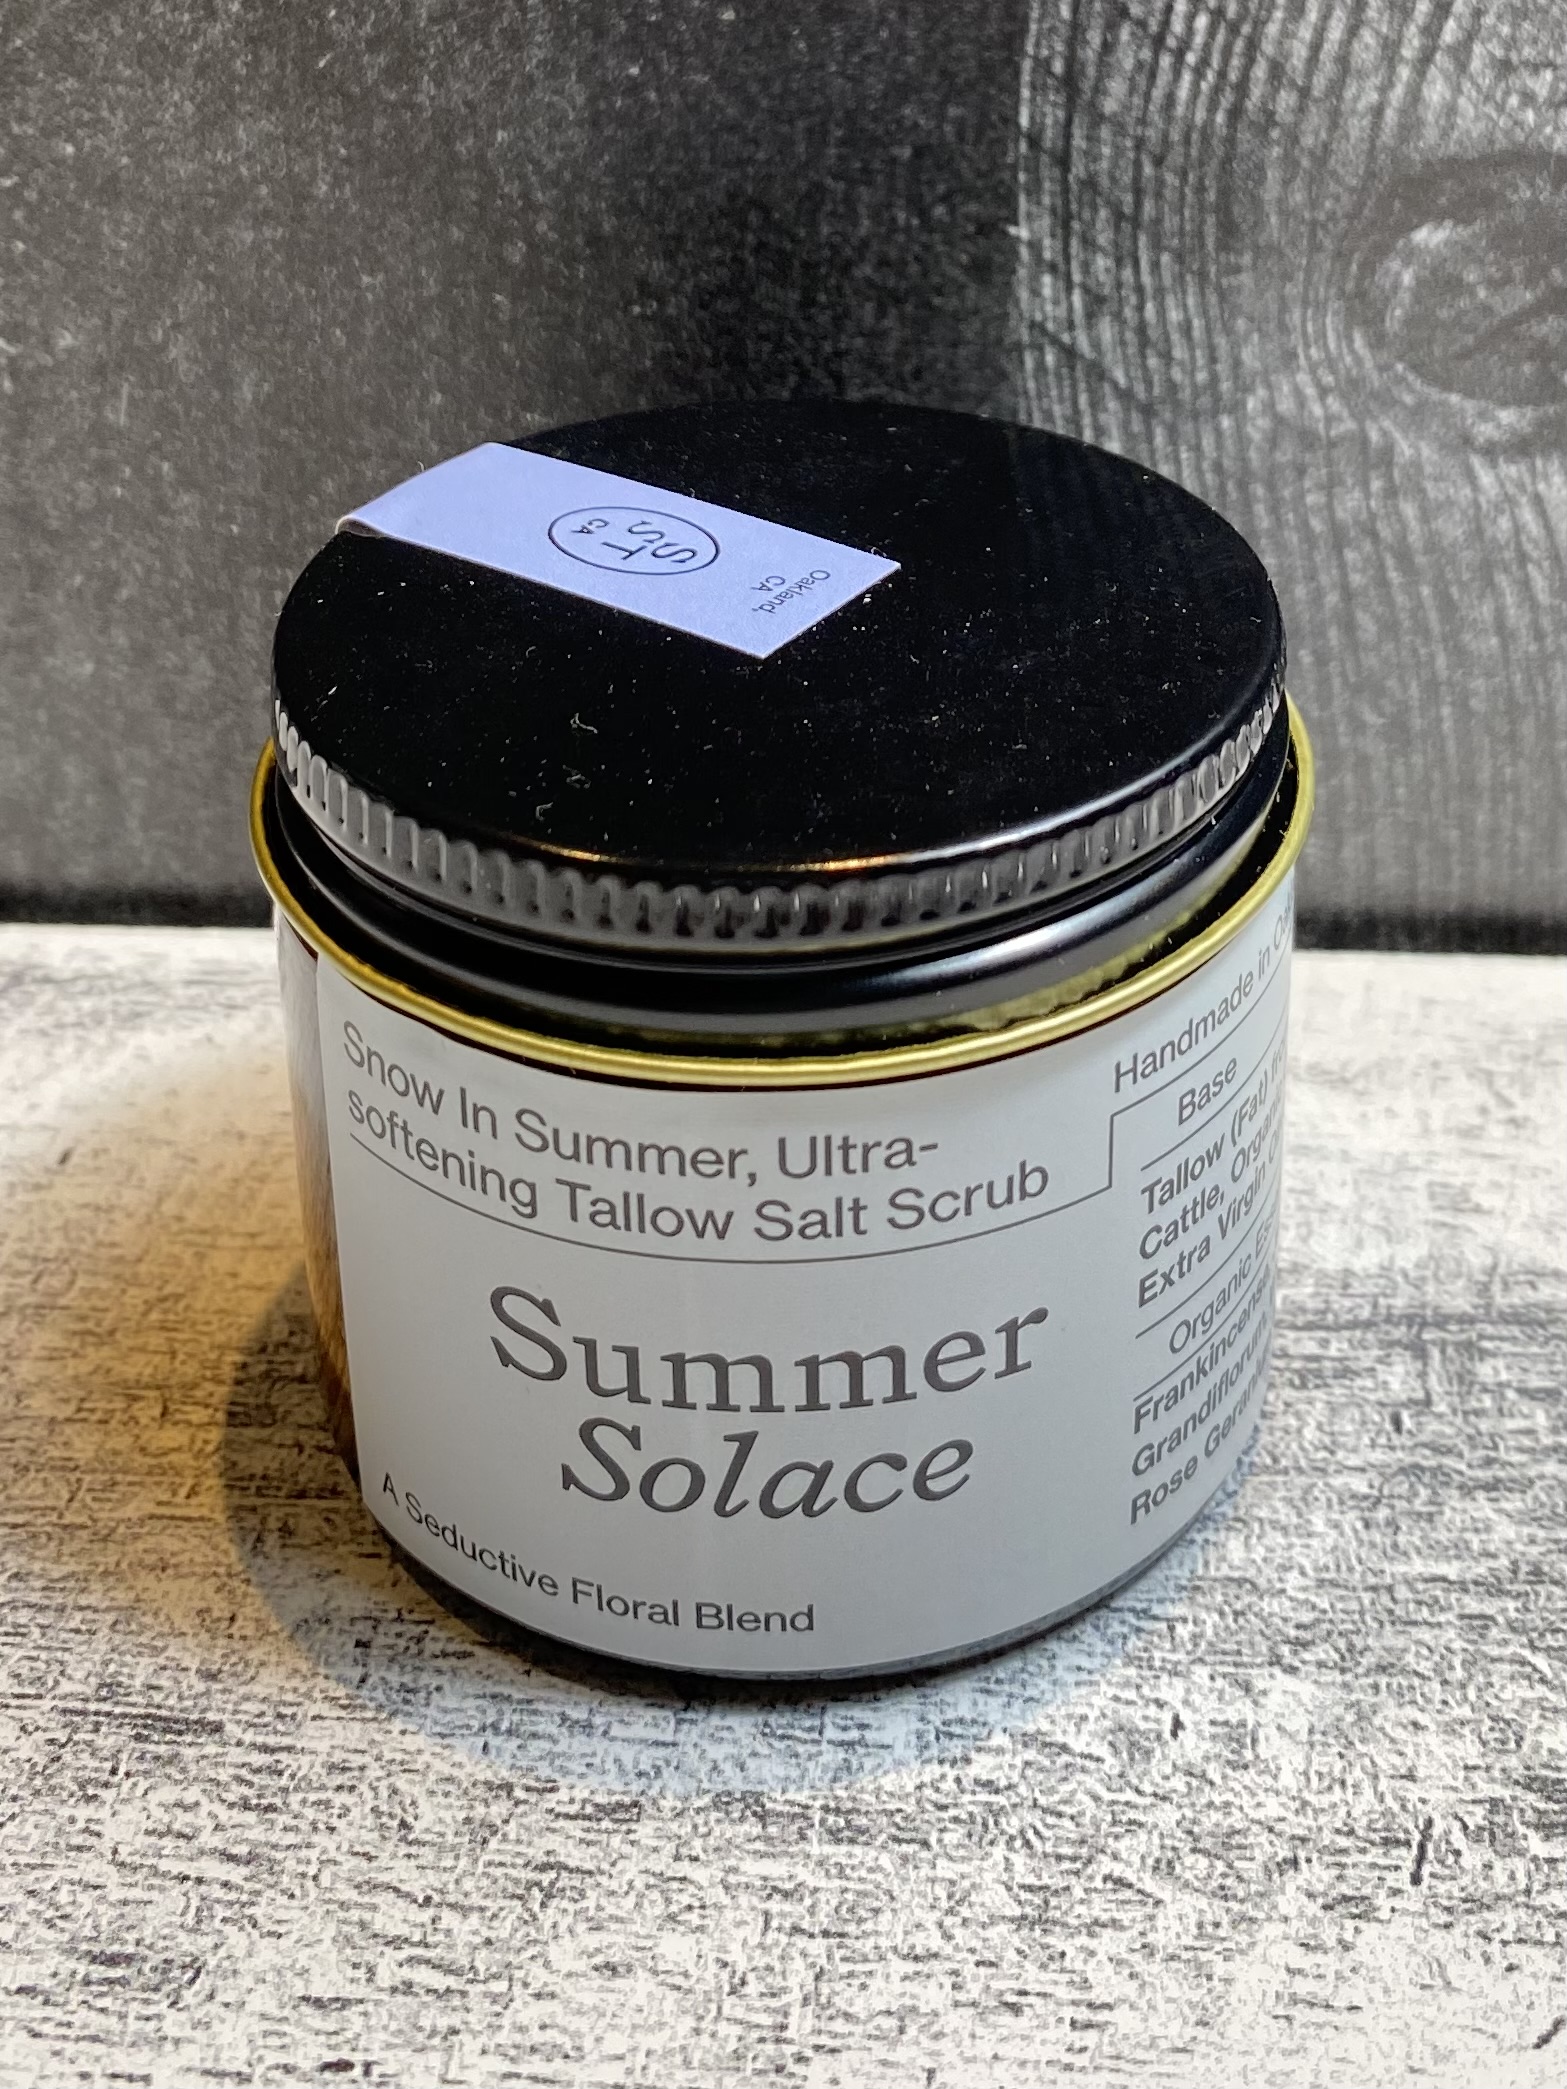 Product Image for Summer S scrub snow in summer